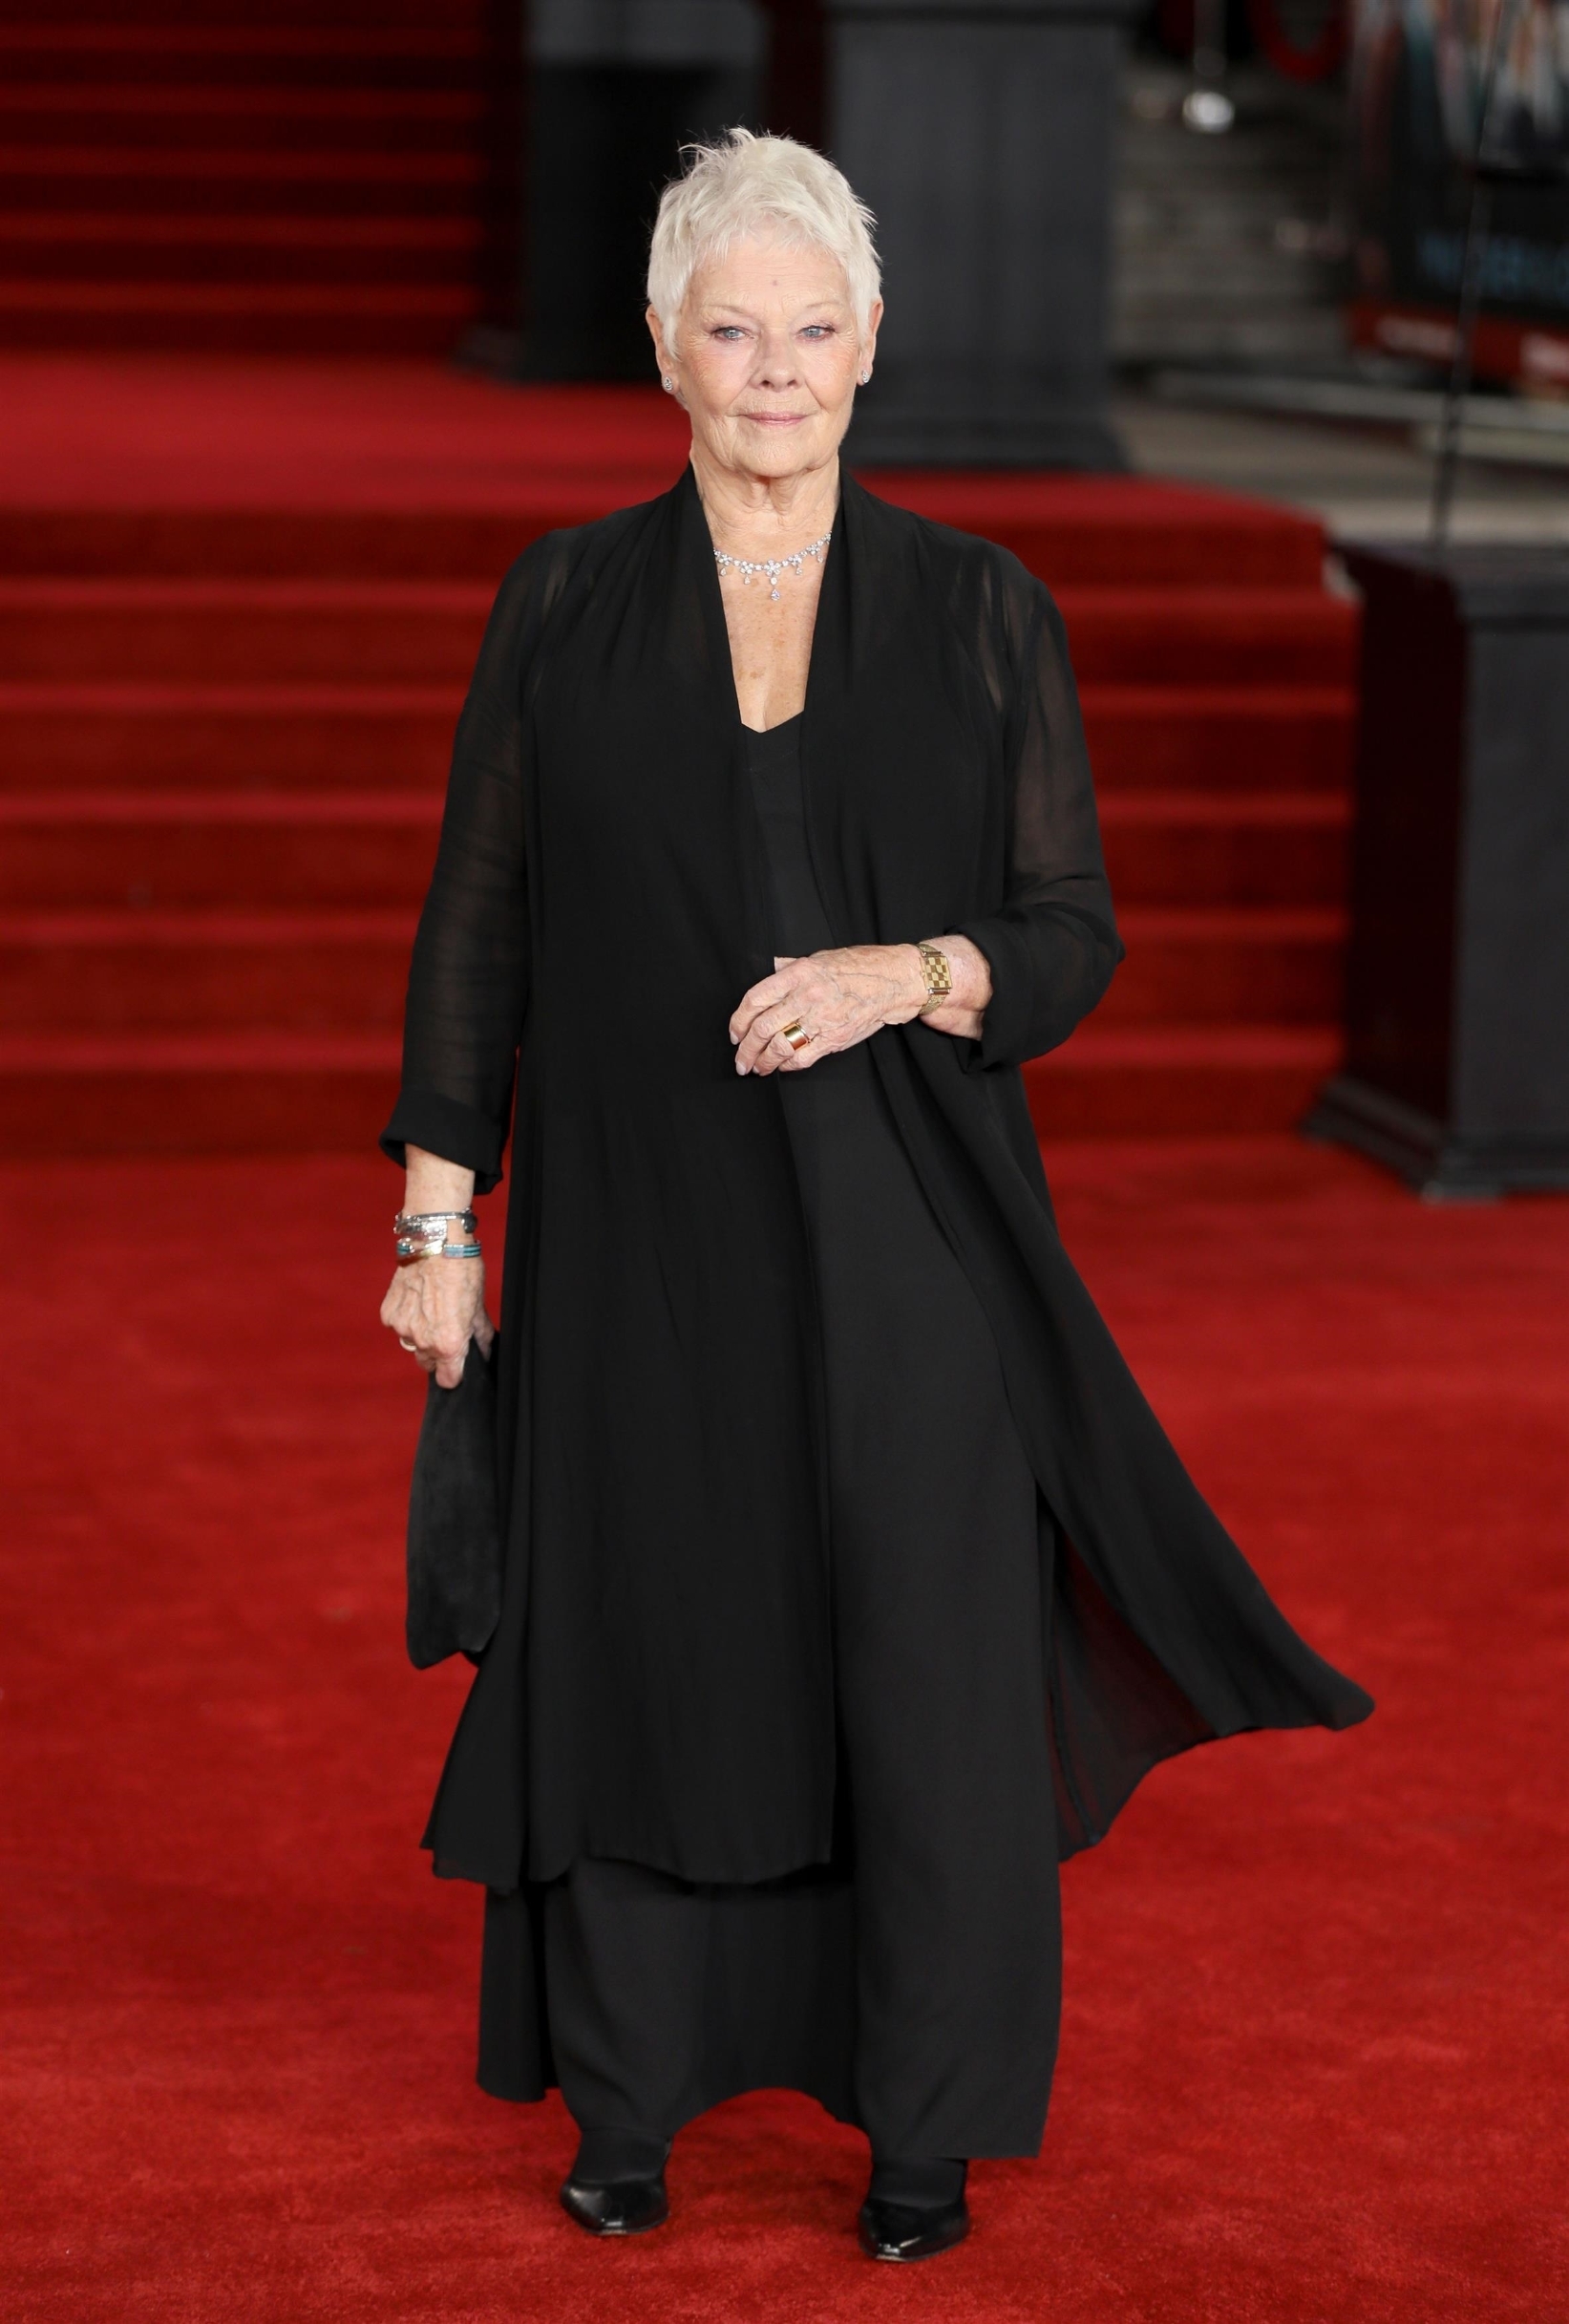 LONDON, UNITED KINGDOM  - 'Murder on the Orient Express' film premiere, Arrivals, London, UK

Pictured: Dame Judi Dench



*UK Clients - Pictures Containing Children
Please Pixelate Face Prior To Publication*, Image: 354491838, License: Rights-managed, Restrictions: , Model Release: no, Credit line: BACKGRID / Backgrid UK / Profimedia